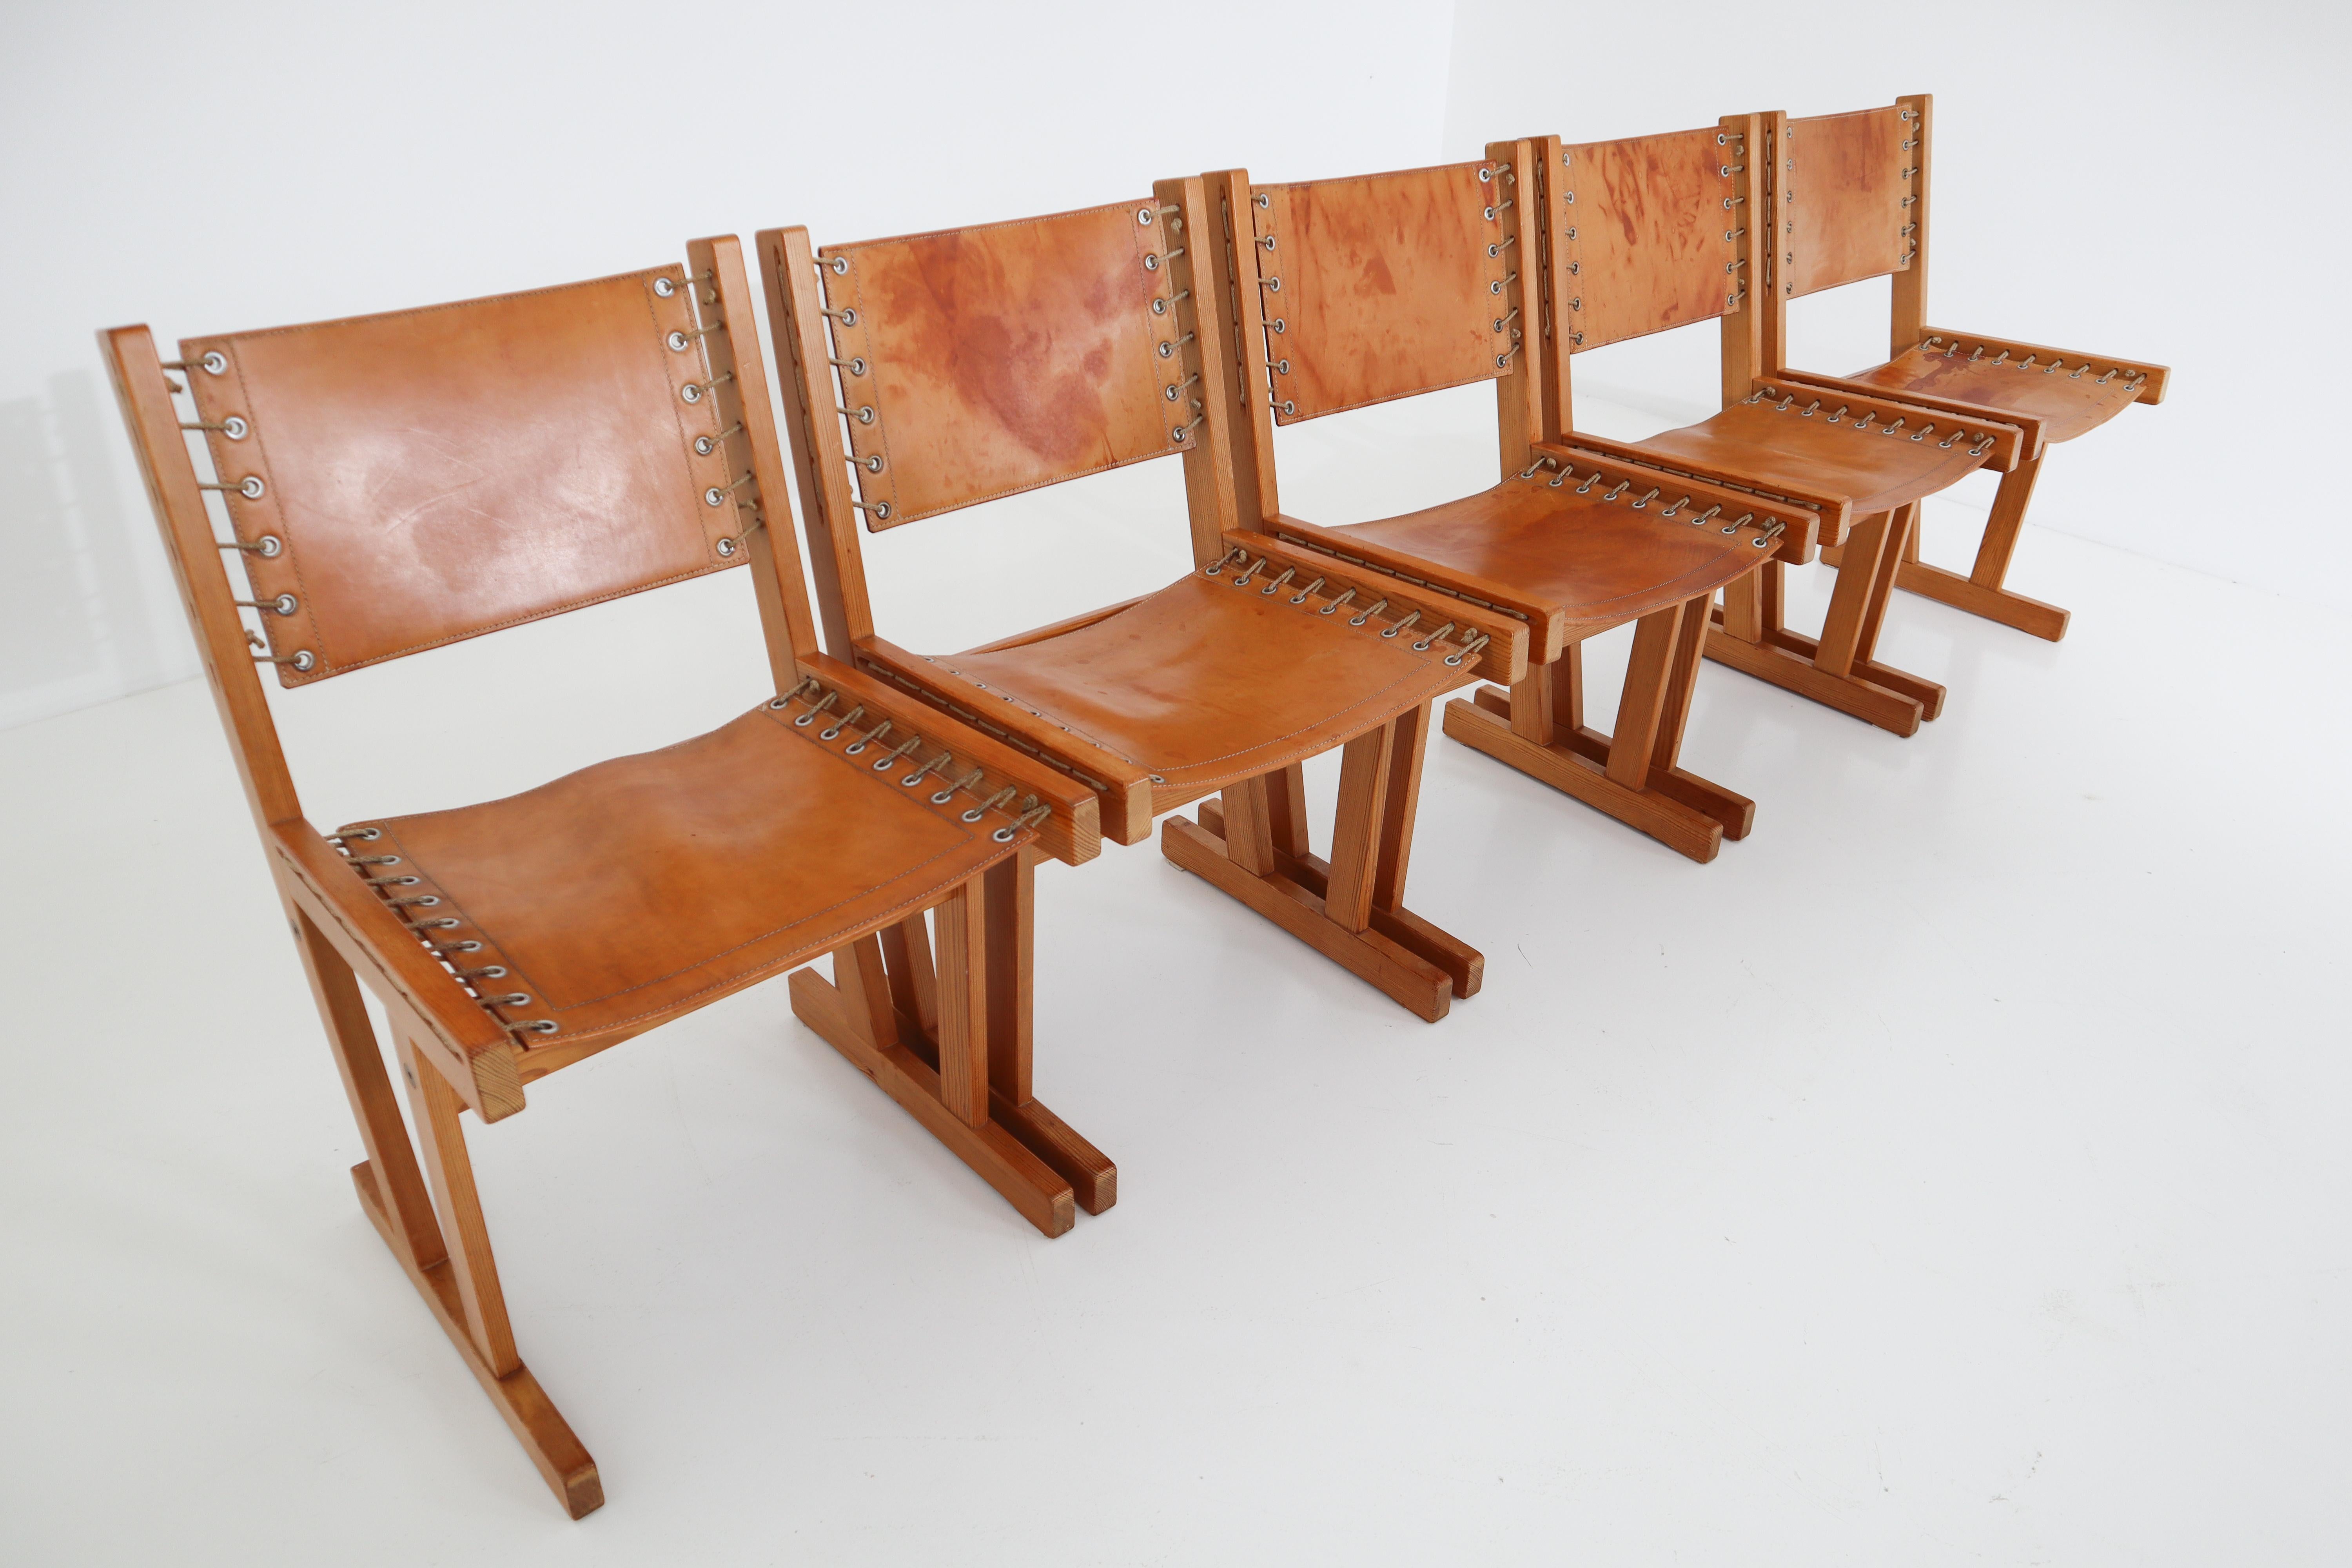 Midcentury Safari Chairs in Thick Cognac Saddle Leather and Solid Pine Wood 2